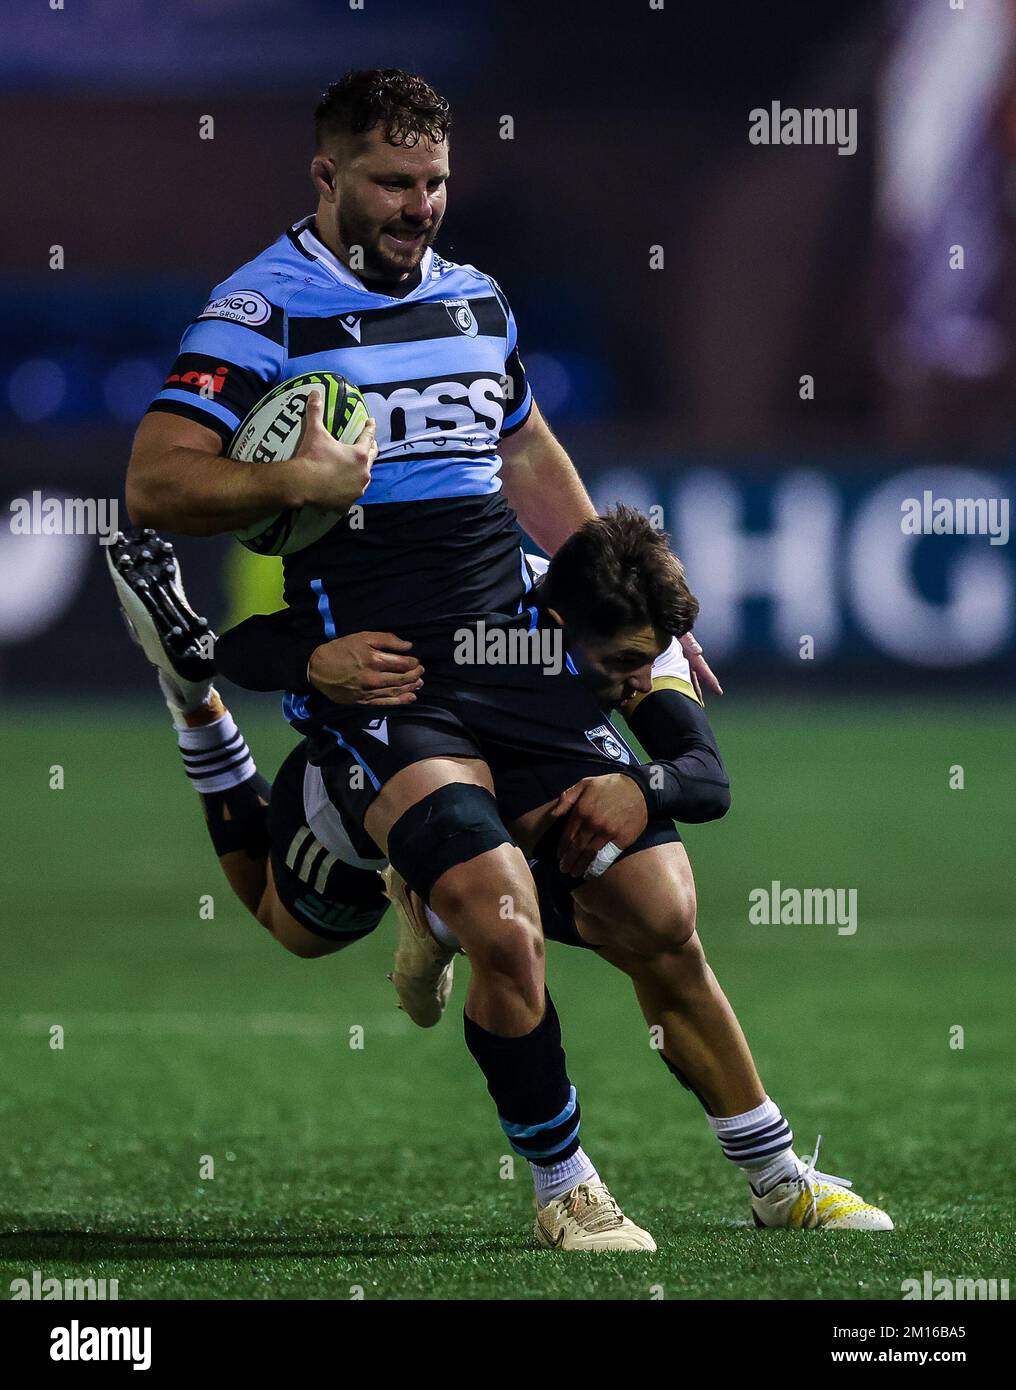 Cardiff Rugby's Thomas Young is tackled by CA Brive's Mathis Ferte in action during the EPCR Challenge Cup match at the Cardiff Arms Park, Cardiff. Picture date: Saturday December 10, 2022. Stock Photo